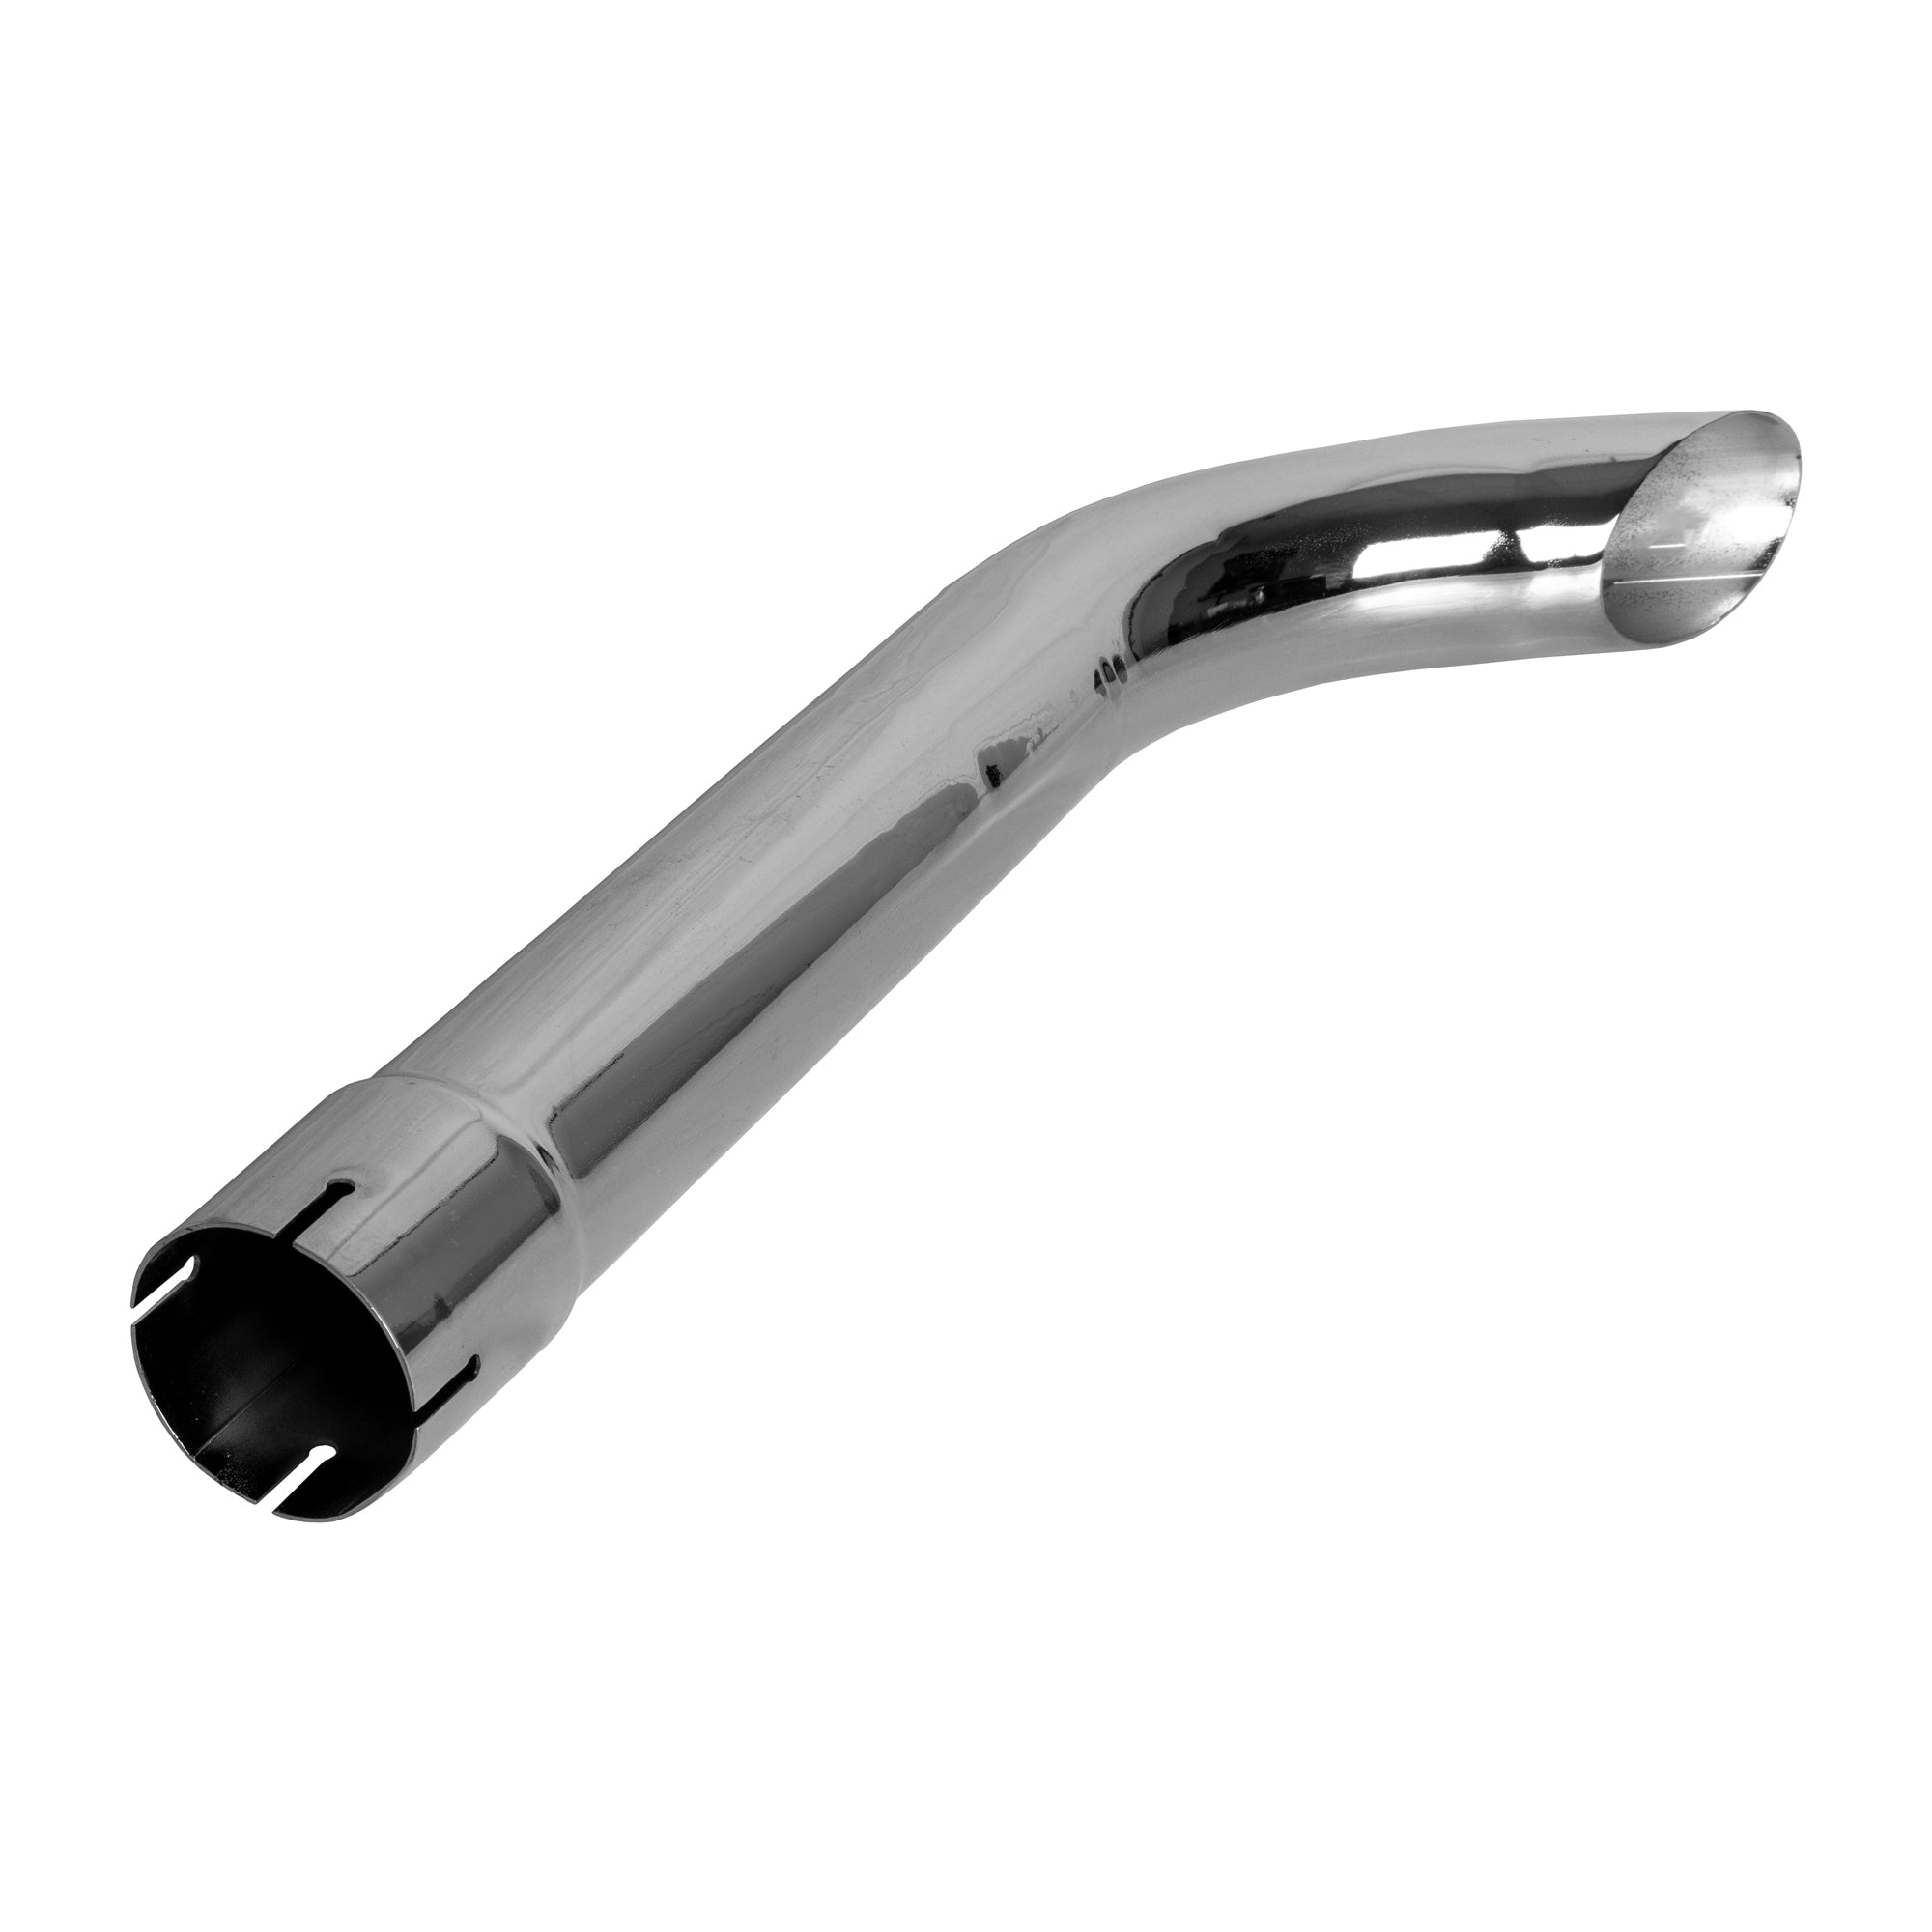 Exhaust Stack Pipe   2-3/8" x 24" Curved Chrome